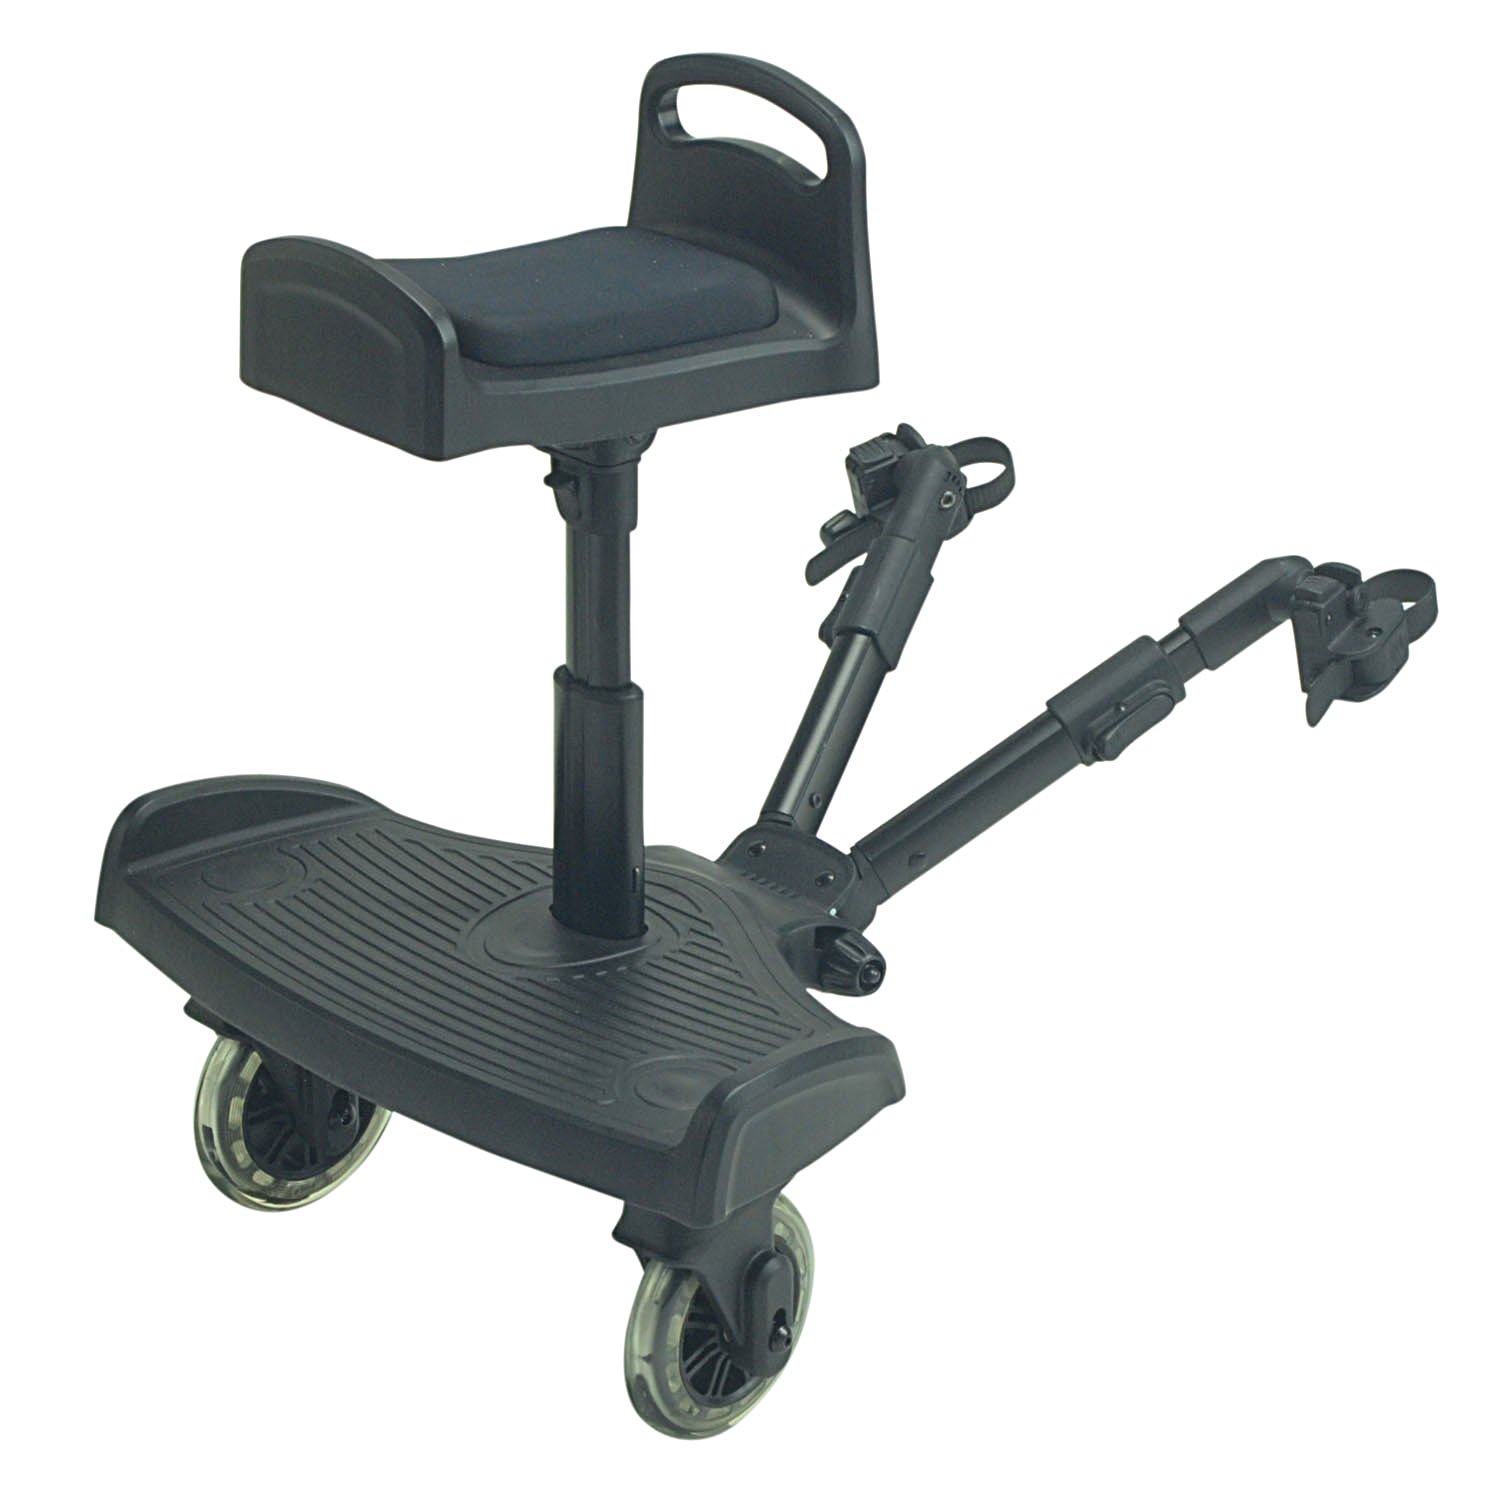 For-your-Little-One For-Your-Little-Ride On Board Compatible Travel Systems, EasyWalker Mini